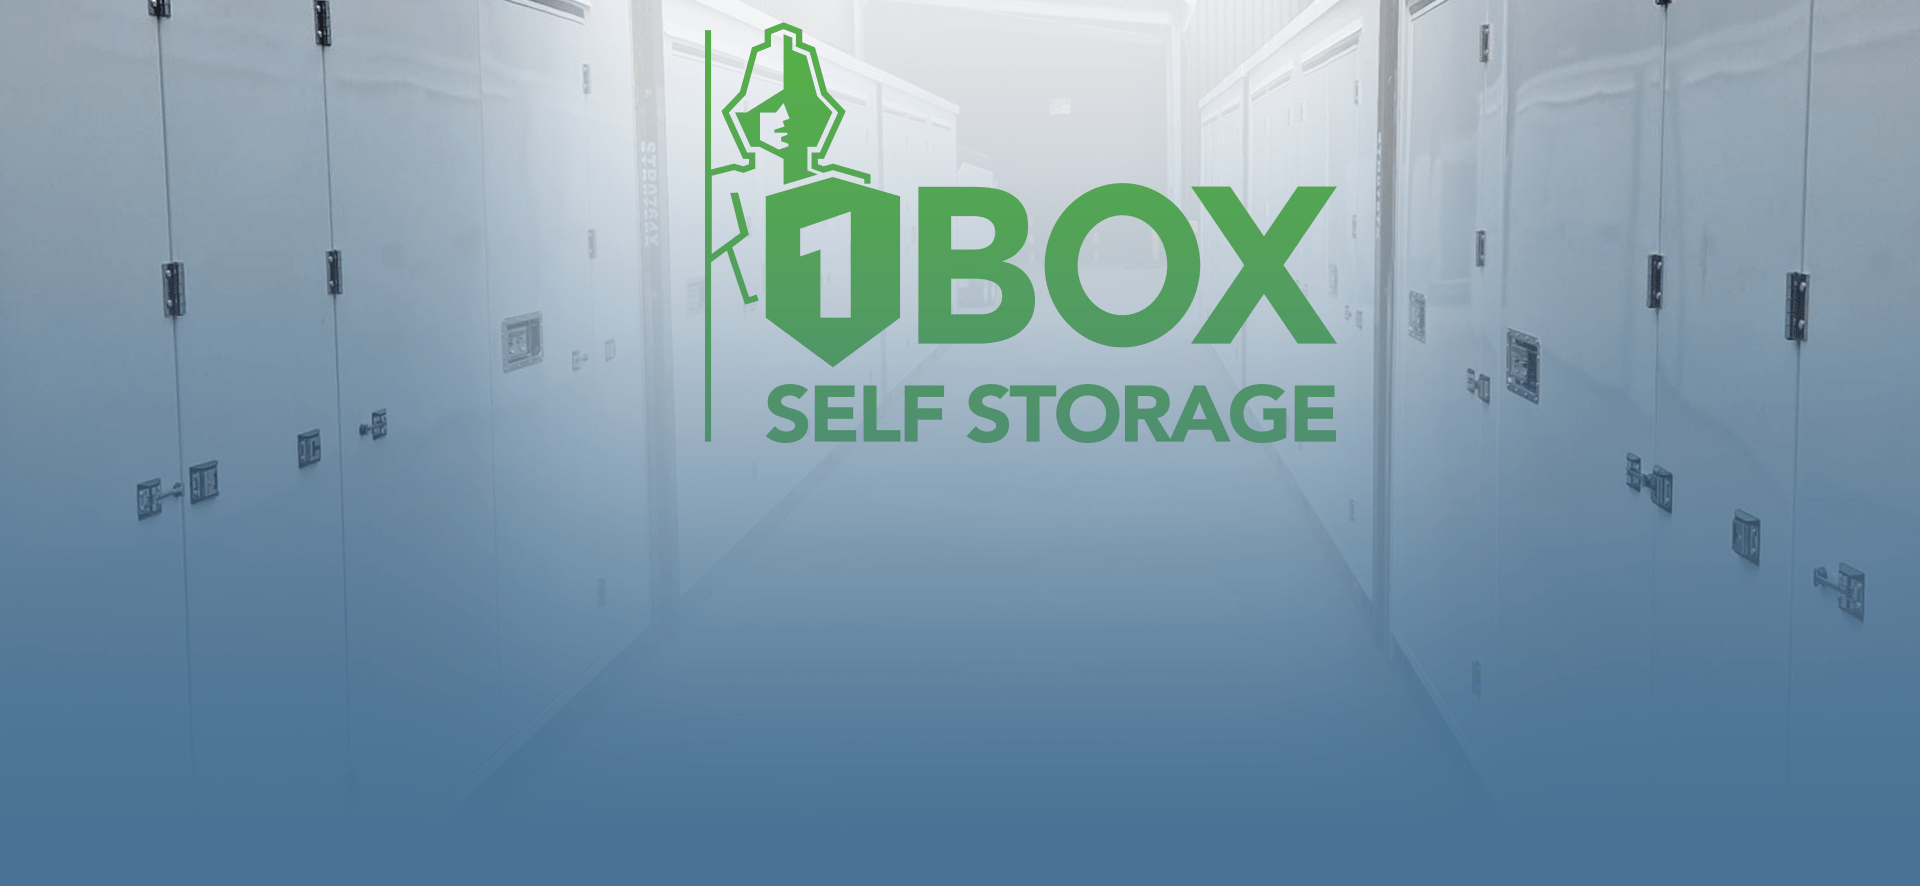 The-Storage-Competitor-Self-Storage-Park-Construction-Project